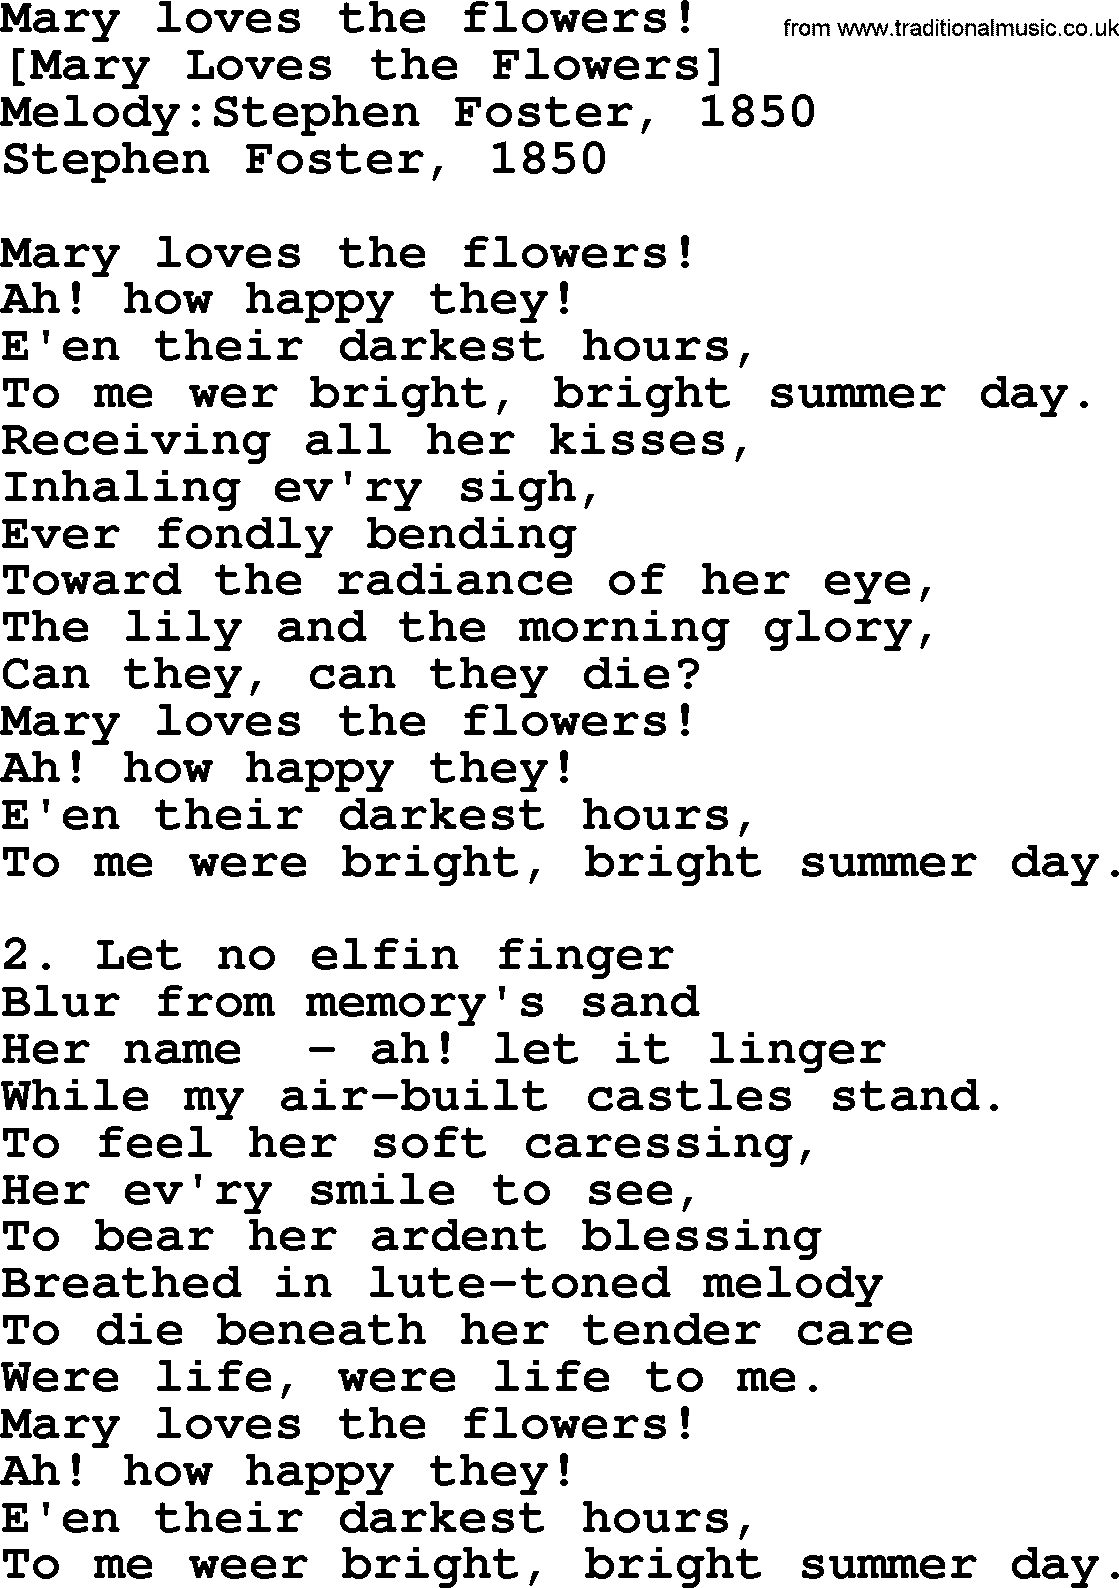 Old American Song: Mary Loves The Flowers!, lyrics